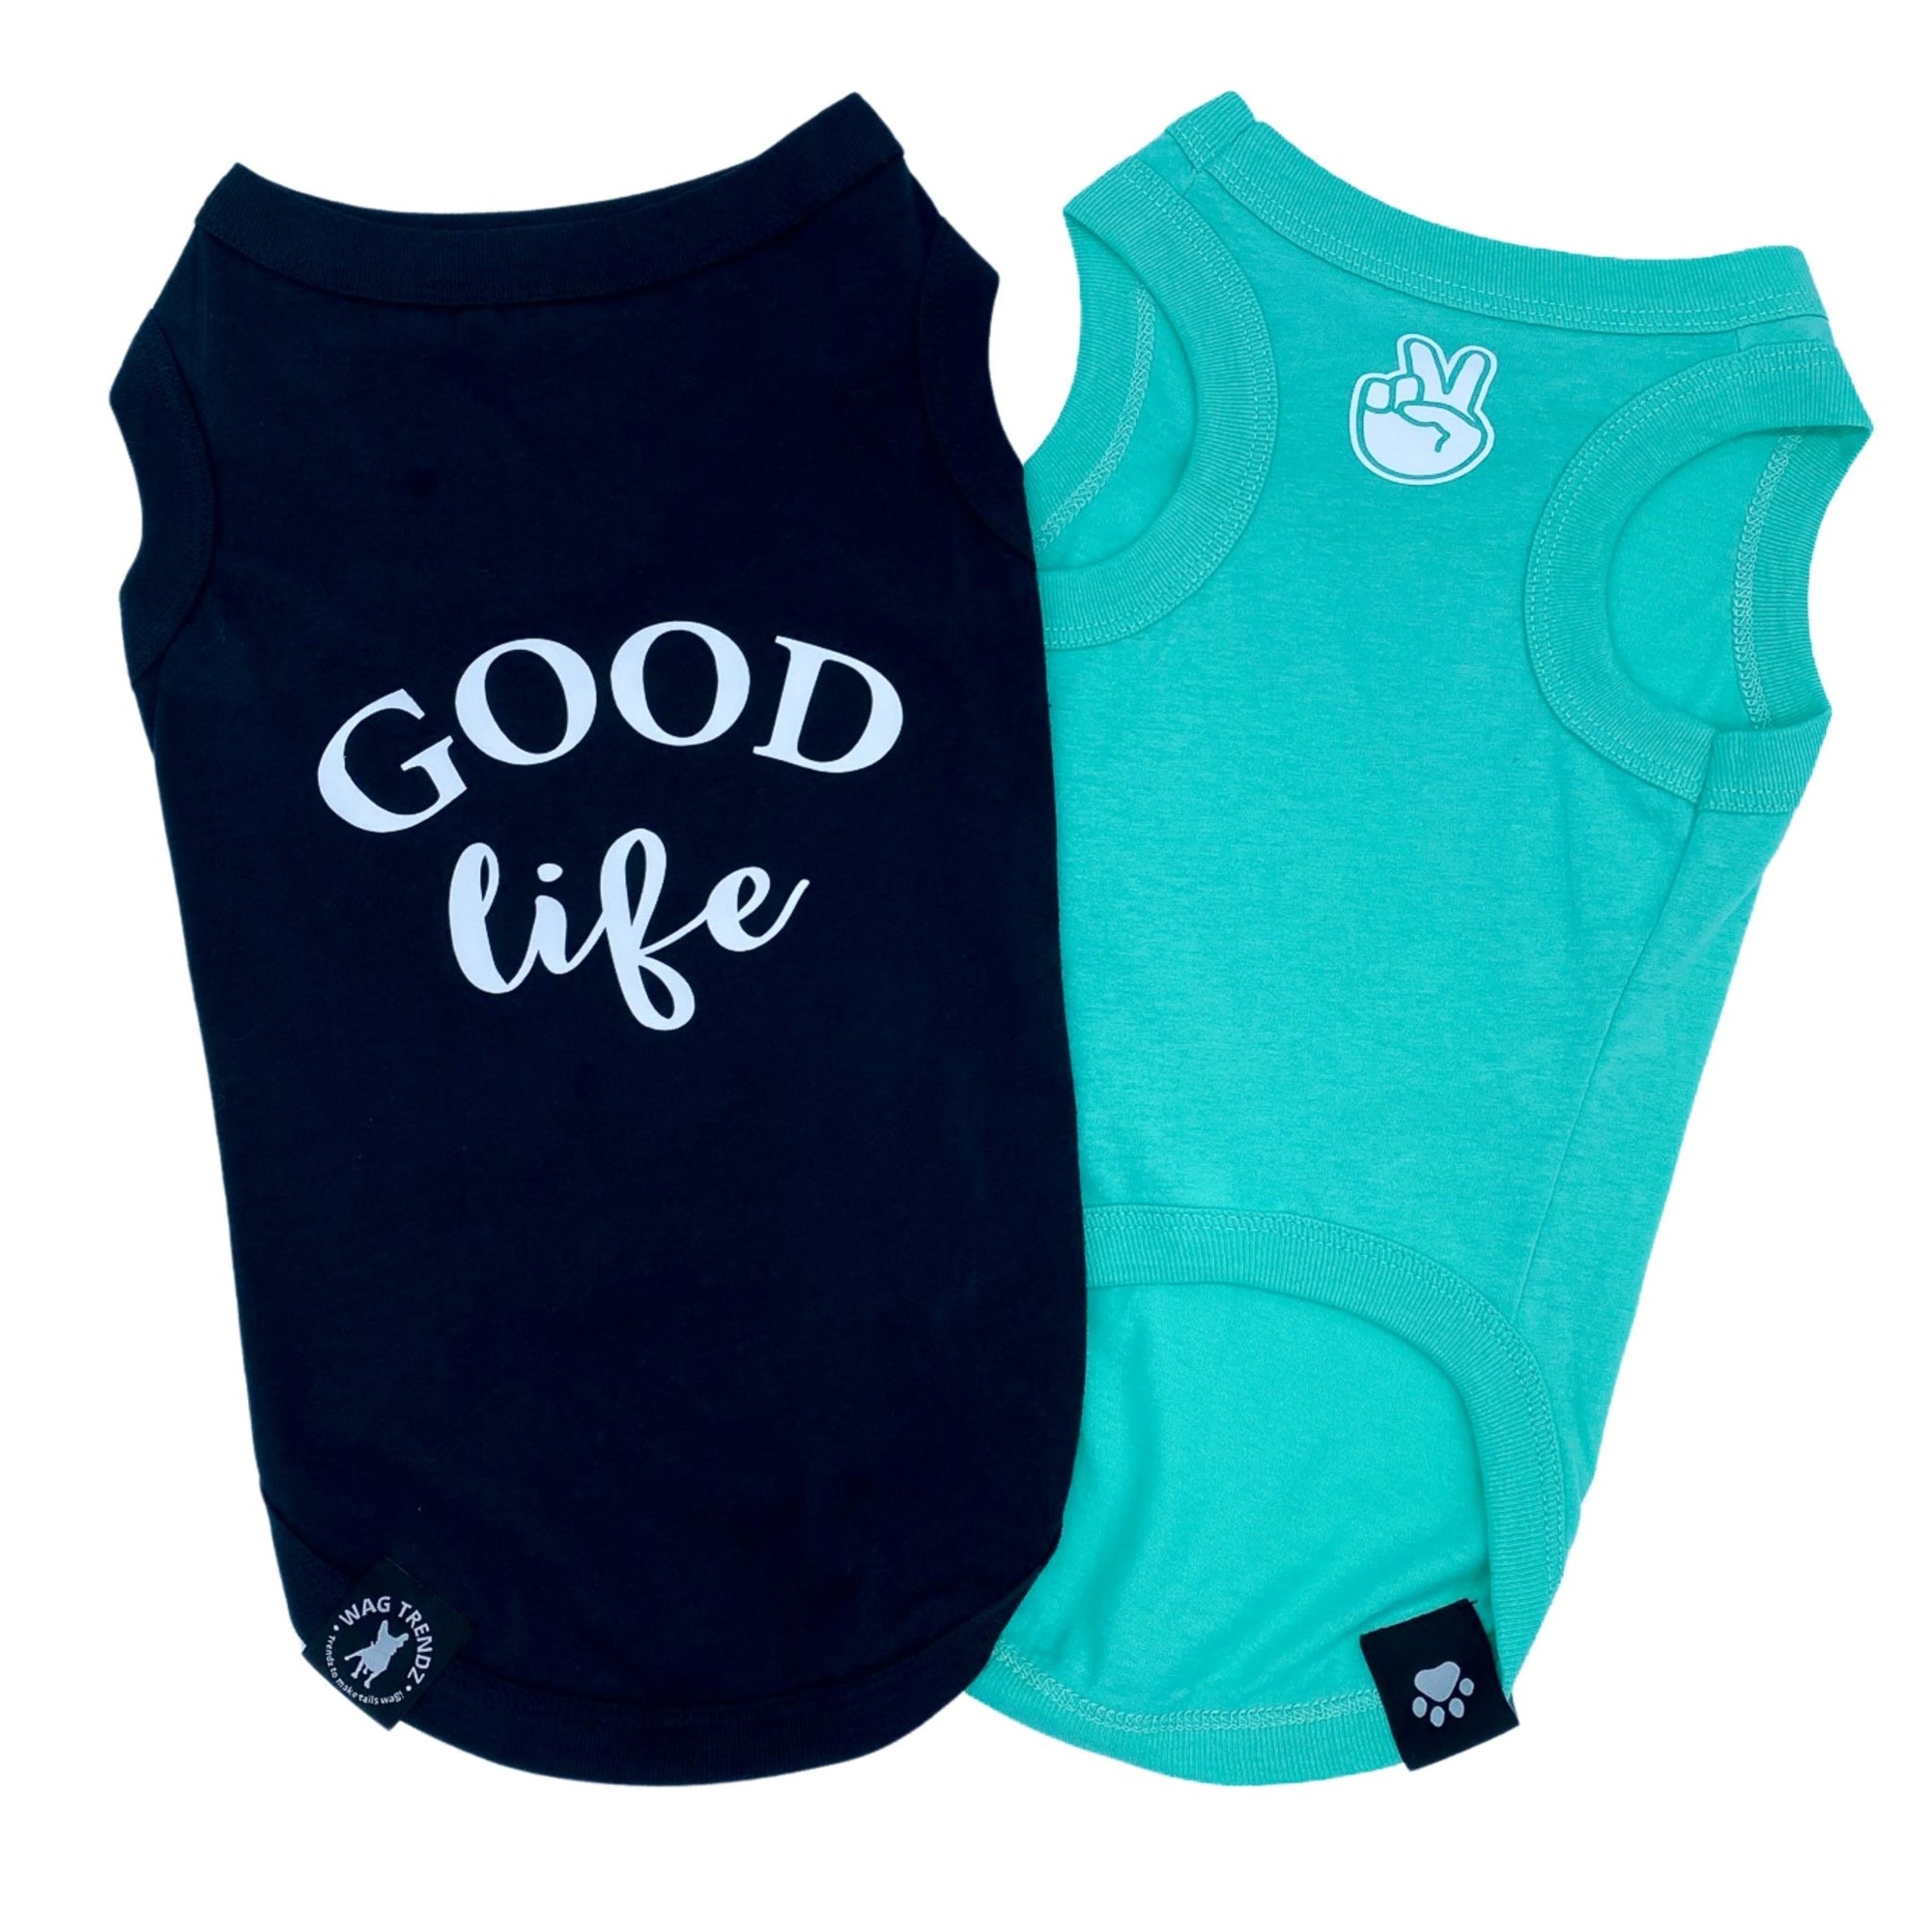 Dog T-Shirt - &quot;Good Life&quot; - Black and Teal - black t-shirt has the words Good Life in white lettering on the back and teal t-shirt has finger peace sign emoji on chest - against a solid white background - Wag Trendz